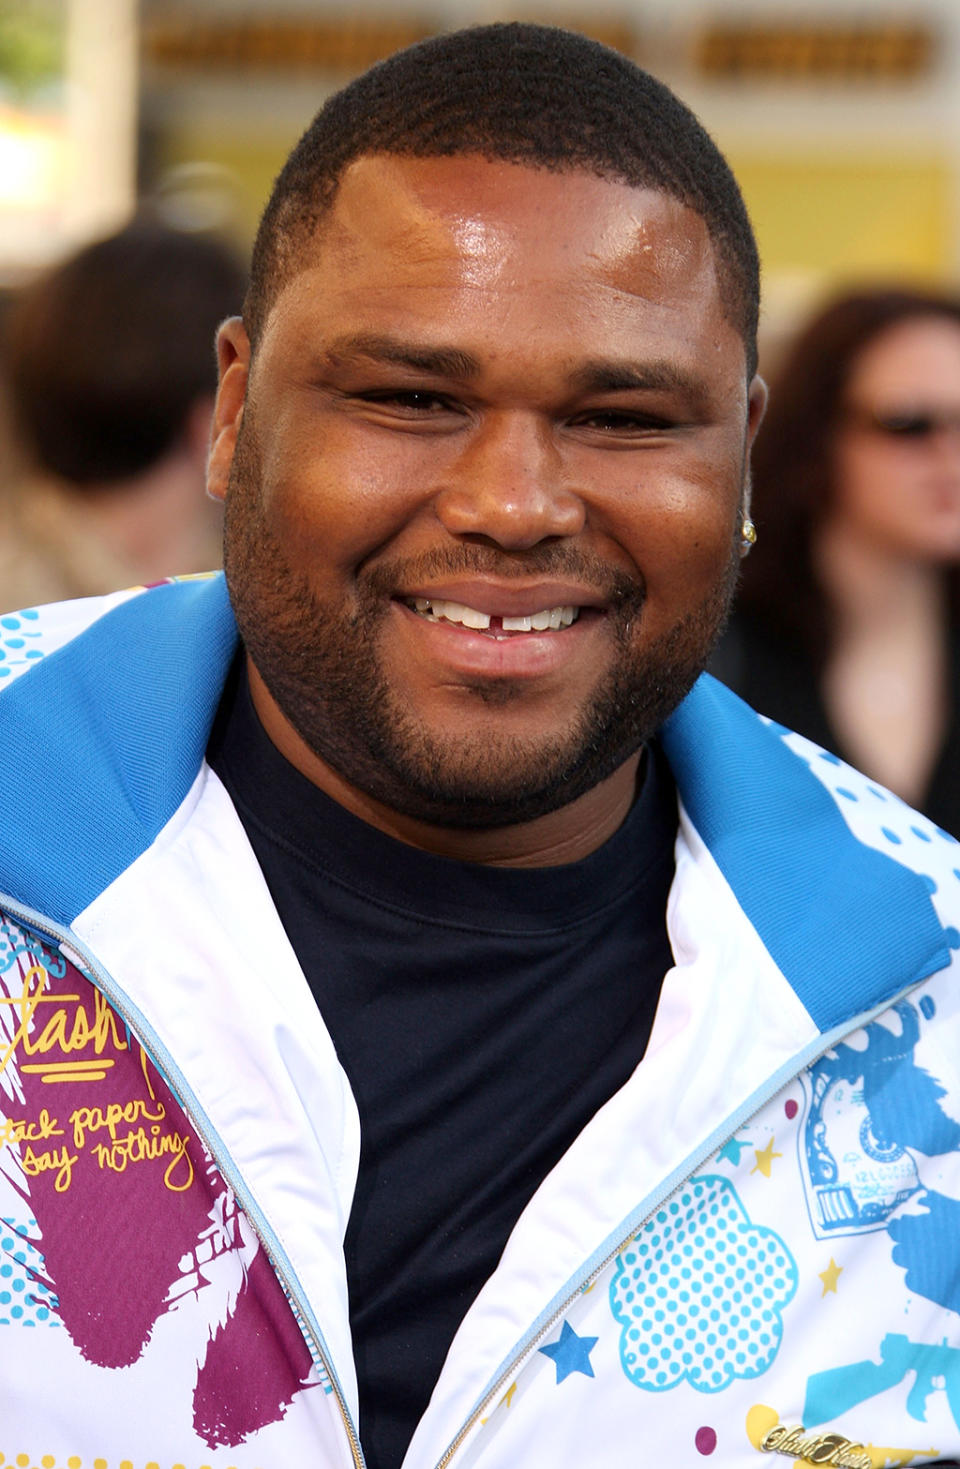 <p>Now known for his lead role in the hit sitcom <em>Black-ish</em>, Anderson portrays a computer hacker <span>— and resident comic relief </span><span>— </span>in the original film. (Photo: Frazer Harrison/Getty Images) </p>